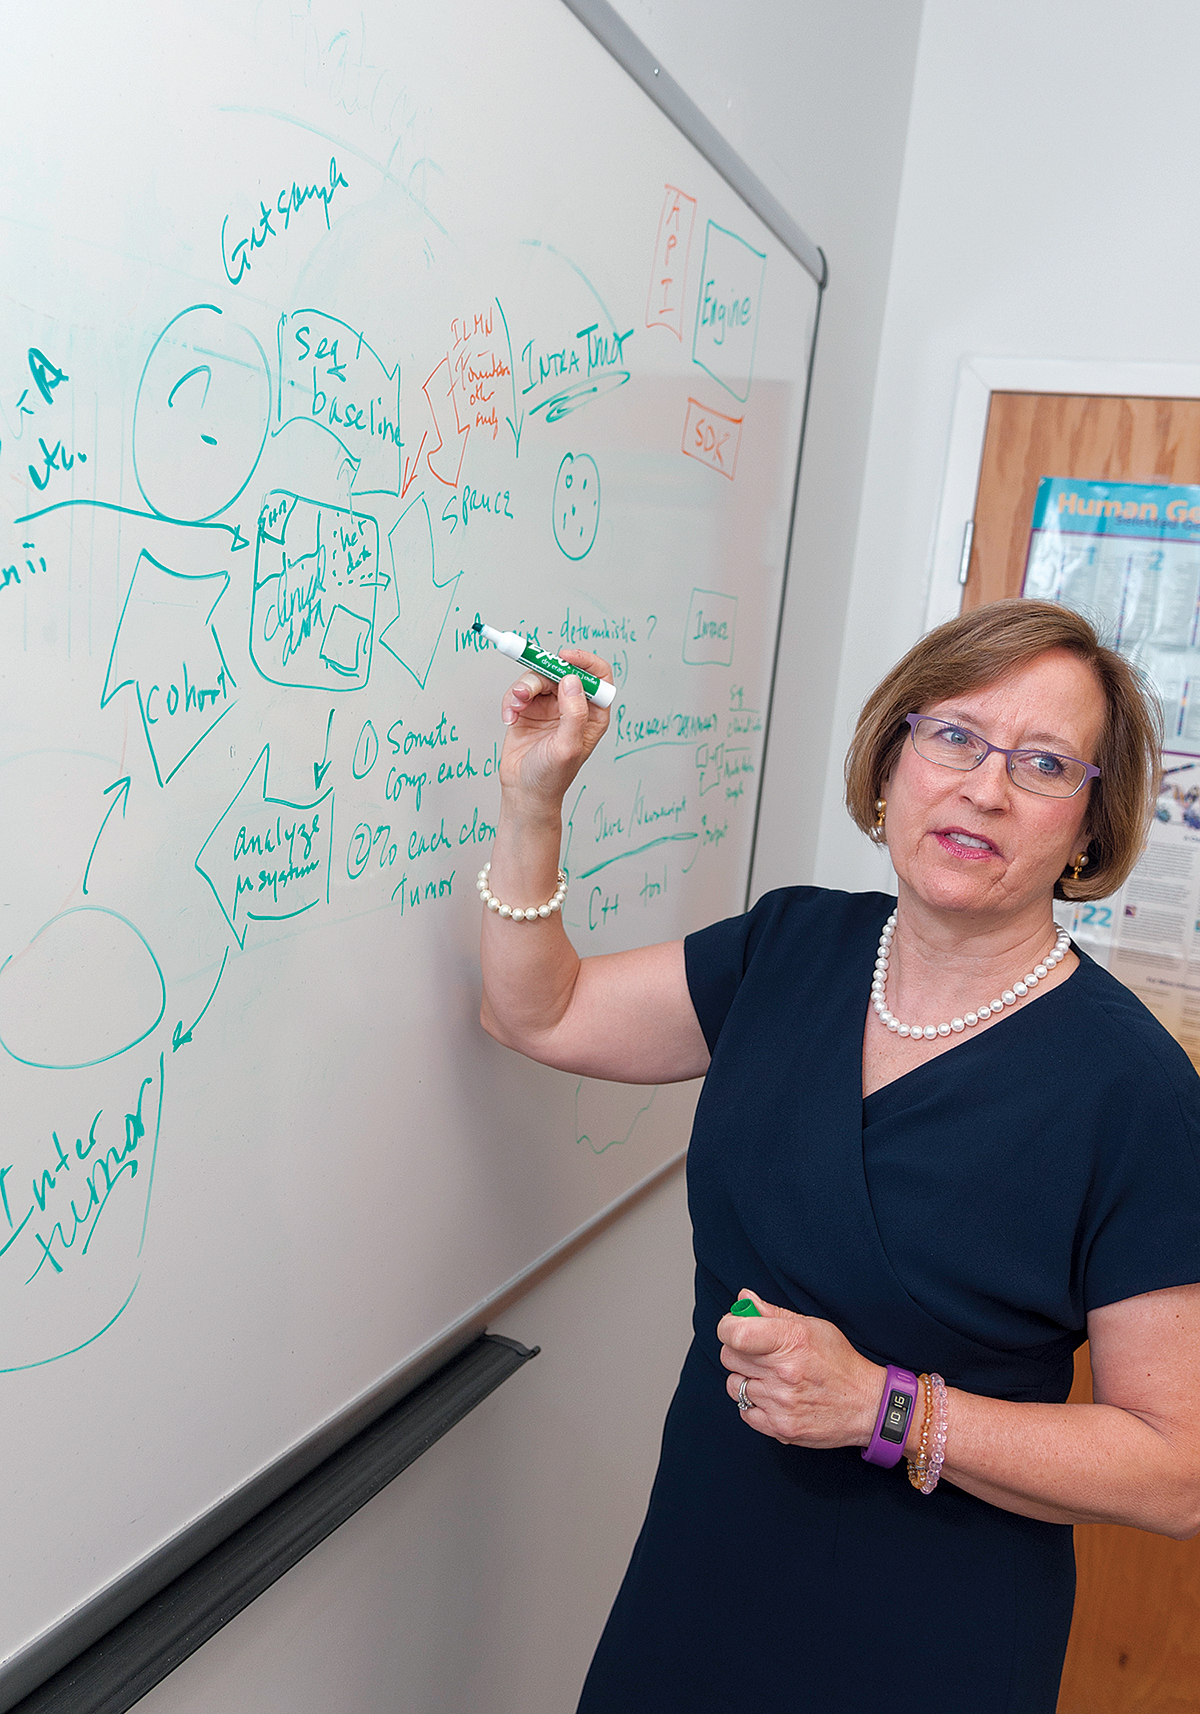 GROWING THE INDUSTRY: ­Patrice M. Milos is president of Providence-based Medley Genomics, a precision health care company focusing on genomic mutations present in cancer cells. / PBN PHOTO/MICHAEL SALERNO